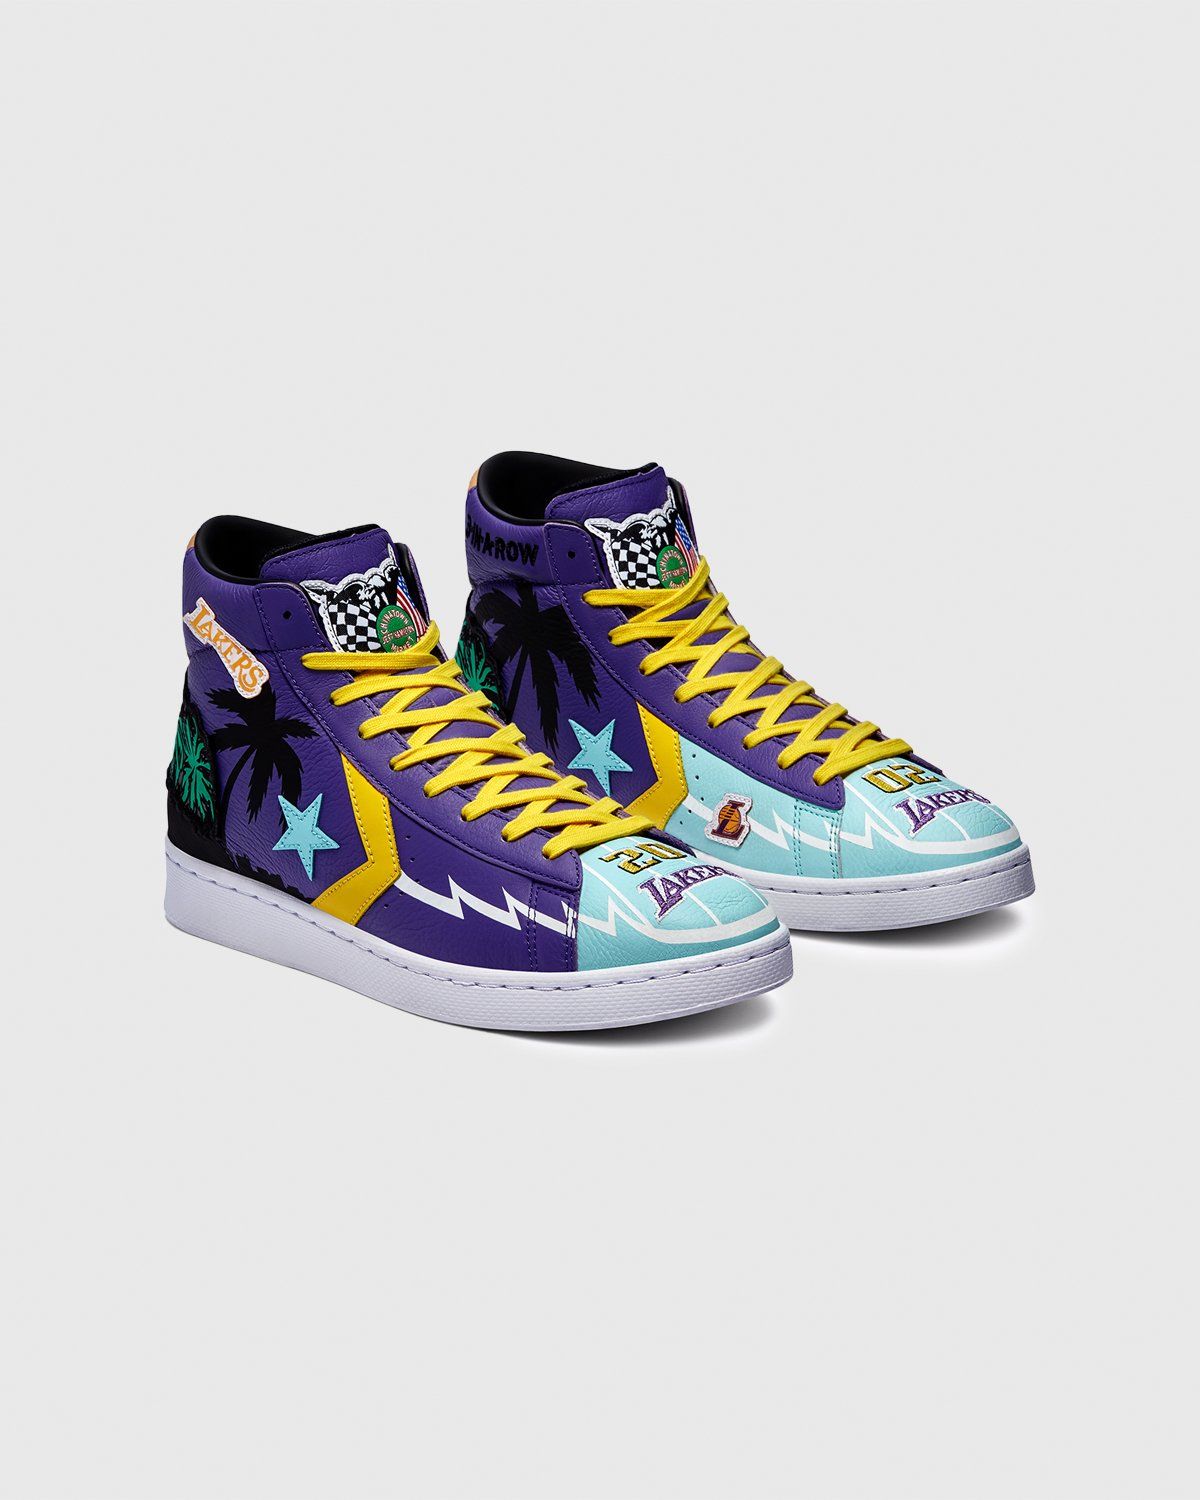 Converse x Jeff Hamilton – Pro Leather High Violet/Poolside - High Top Sneakers - Purple - Image 2